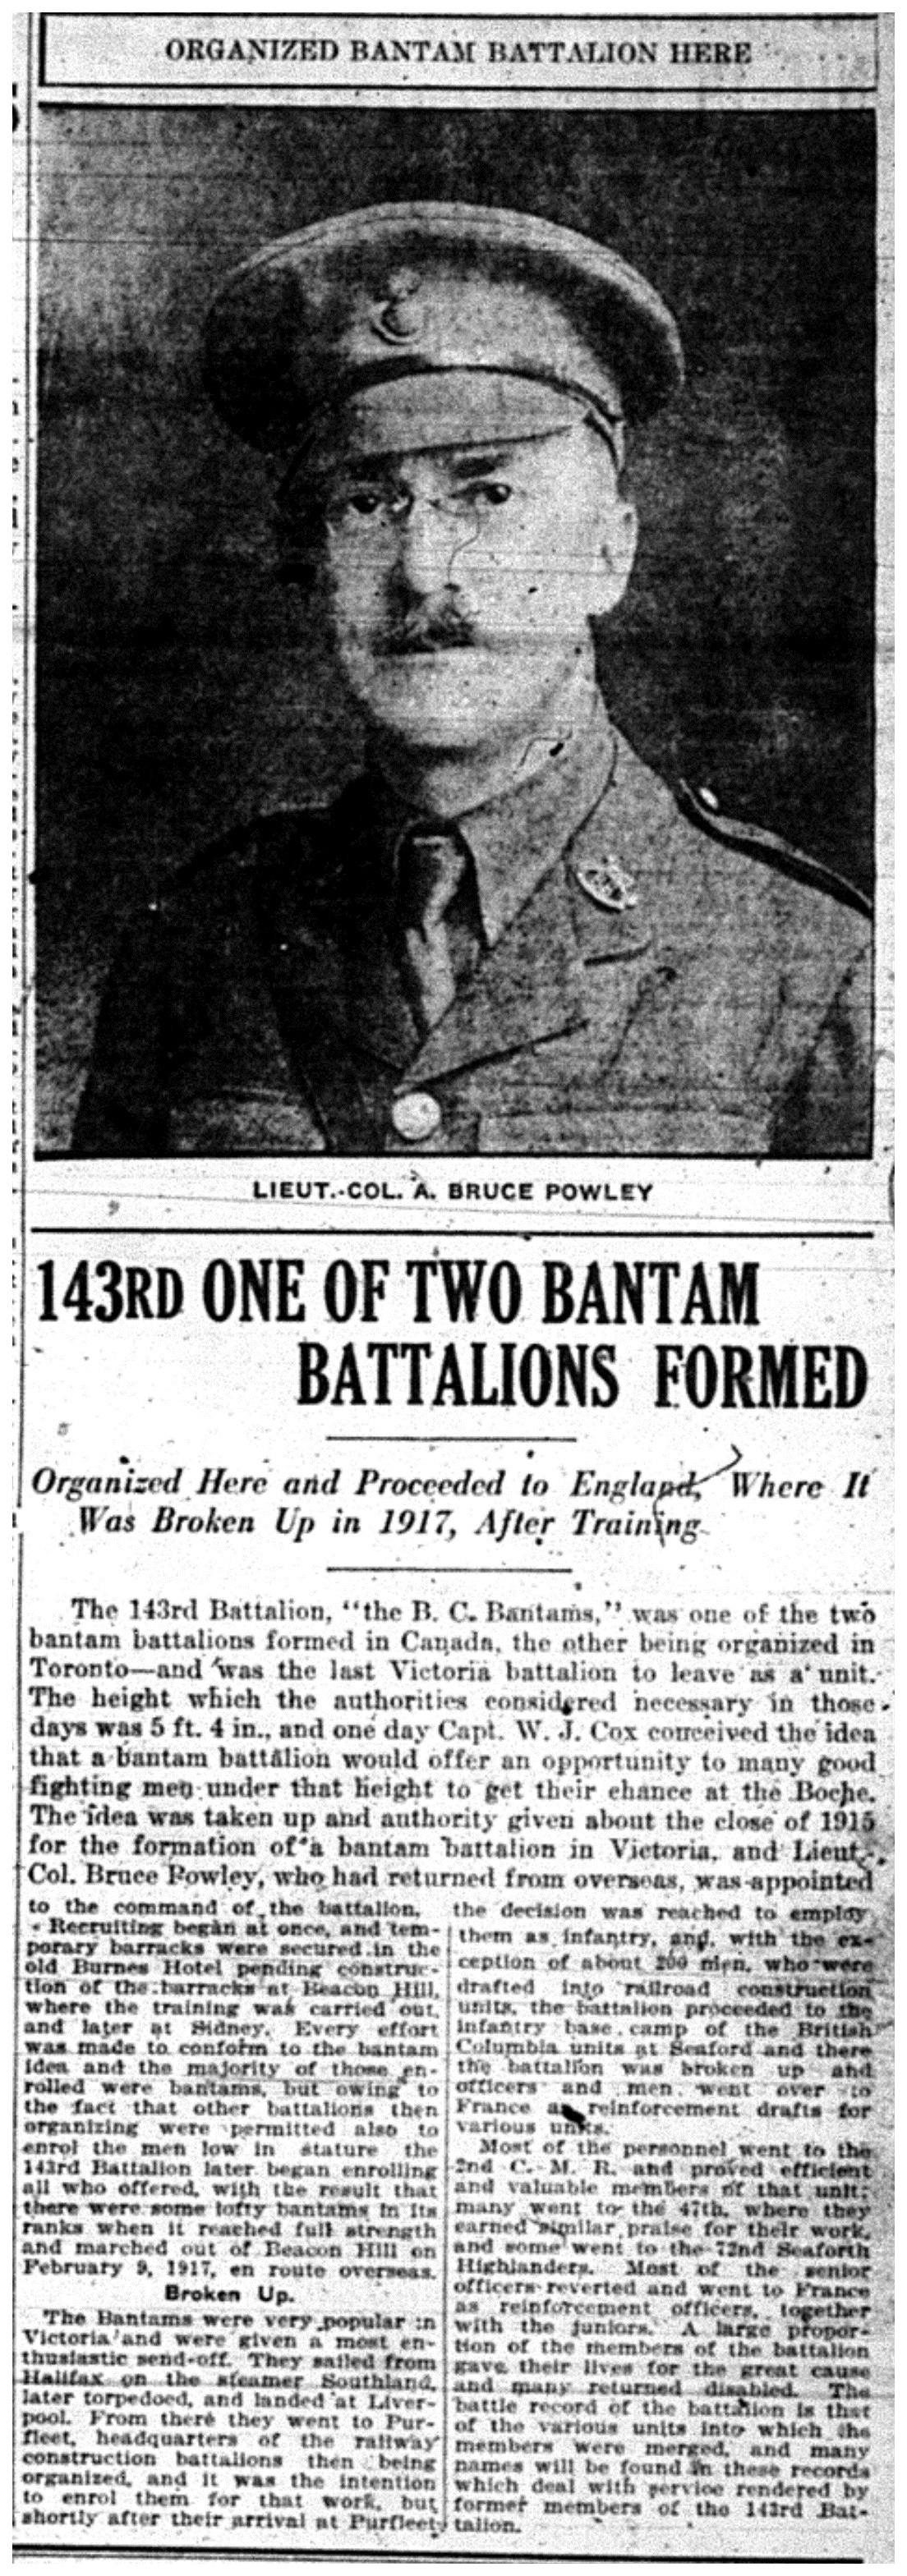 "143rd One of Two Bantam Battalions Formed"